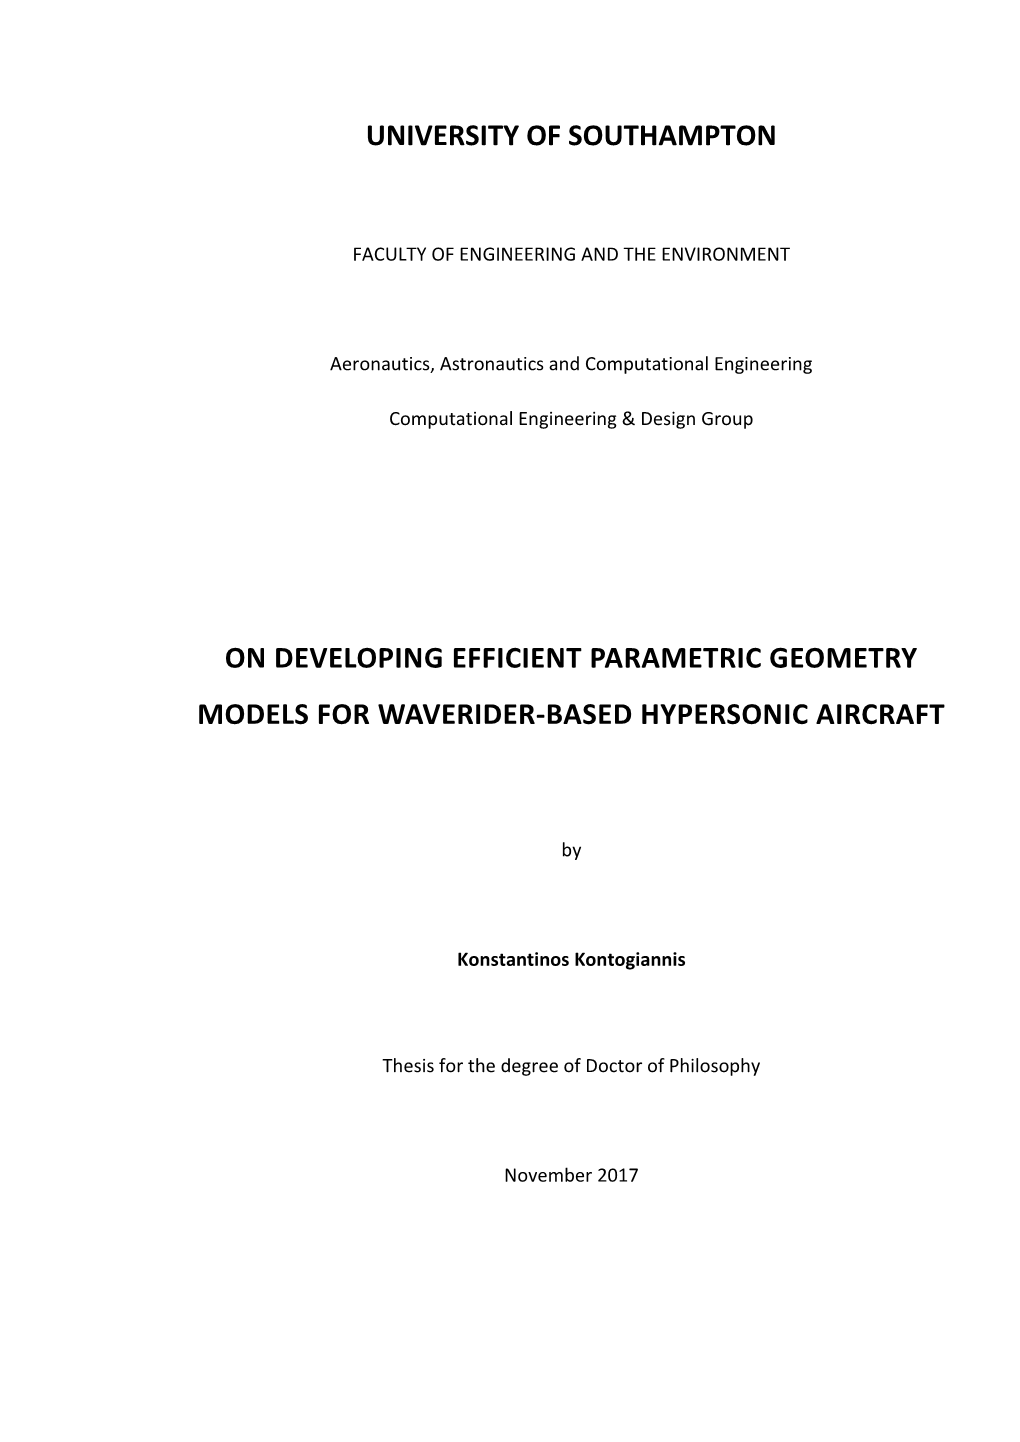 On Developing Efficient Parametric Geometry Models for Waverider-Based Hypersonic Aircraft